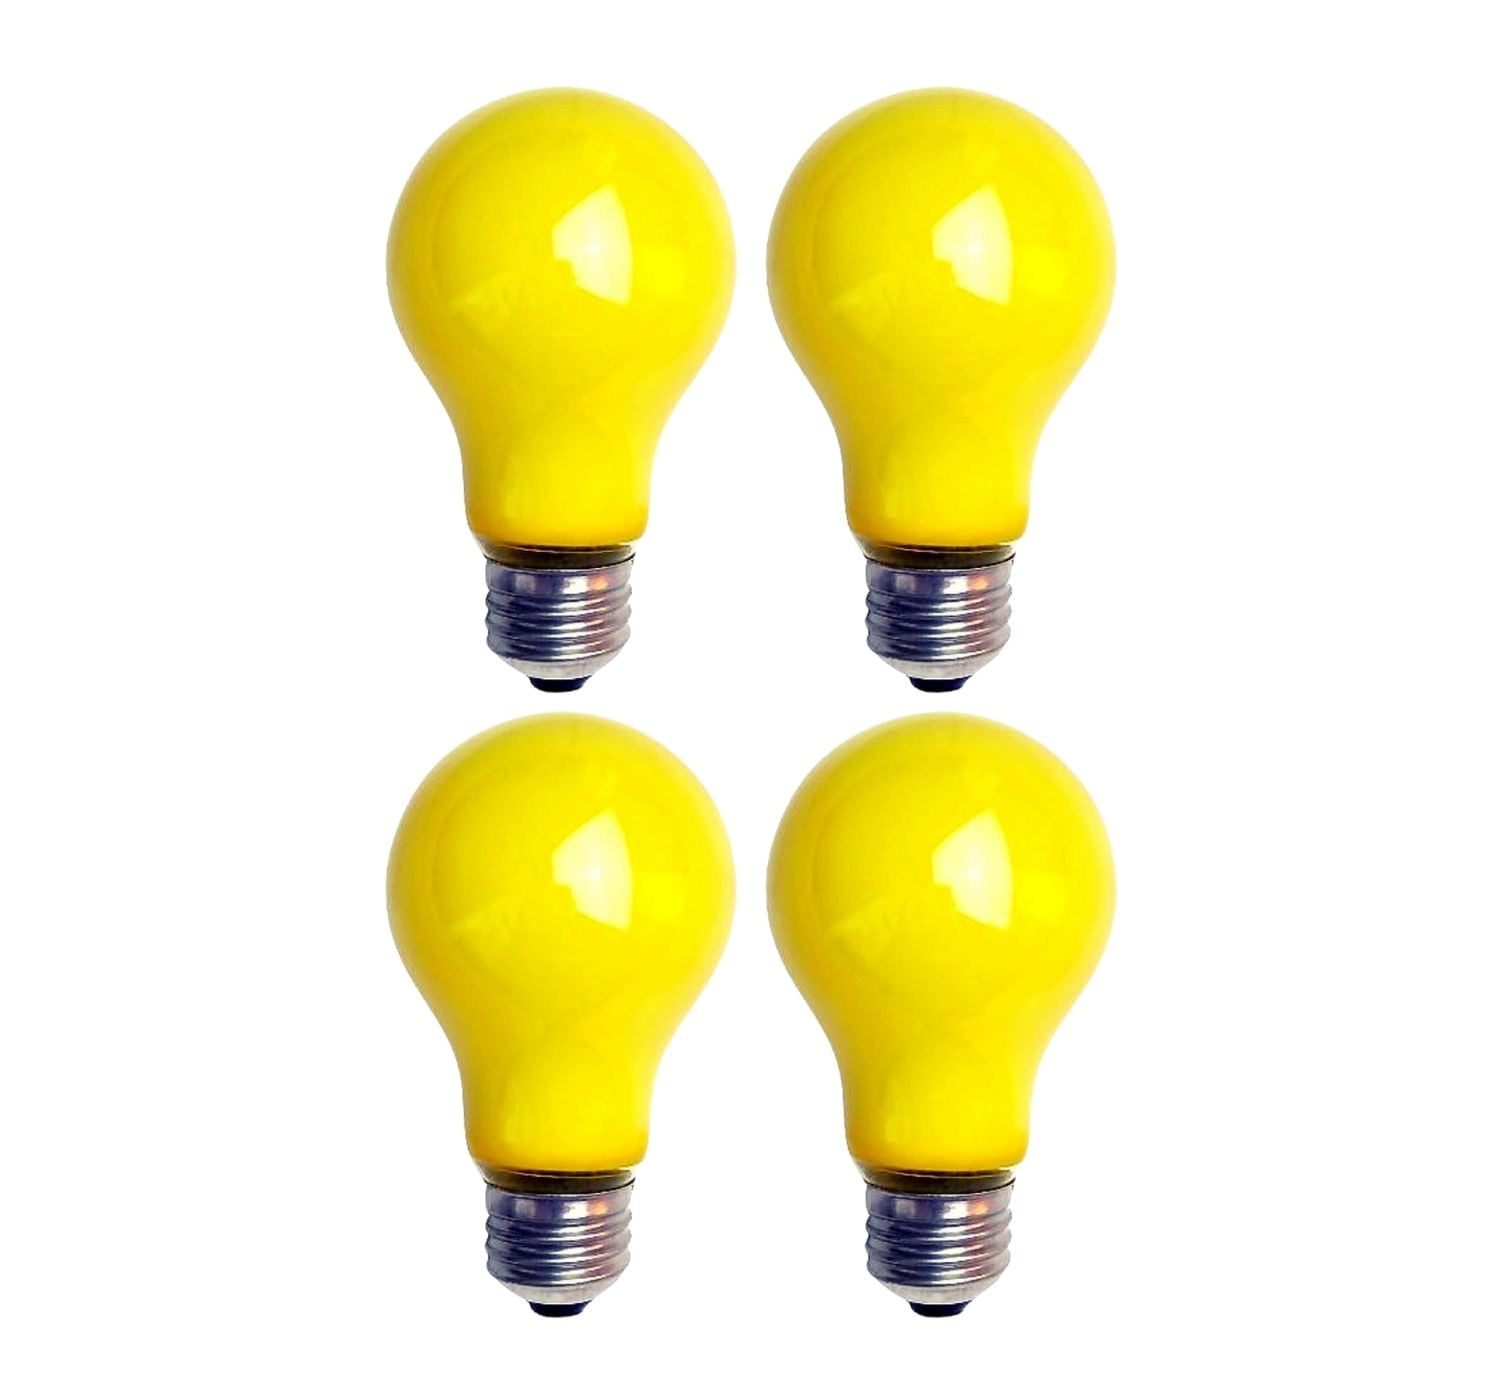 4 of NEW yellow A19 sign 25w OUTDOOR 25 WATT 130V transparent PARTY LIGHT BULB 